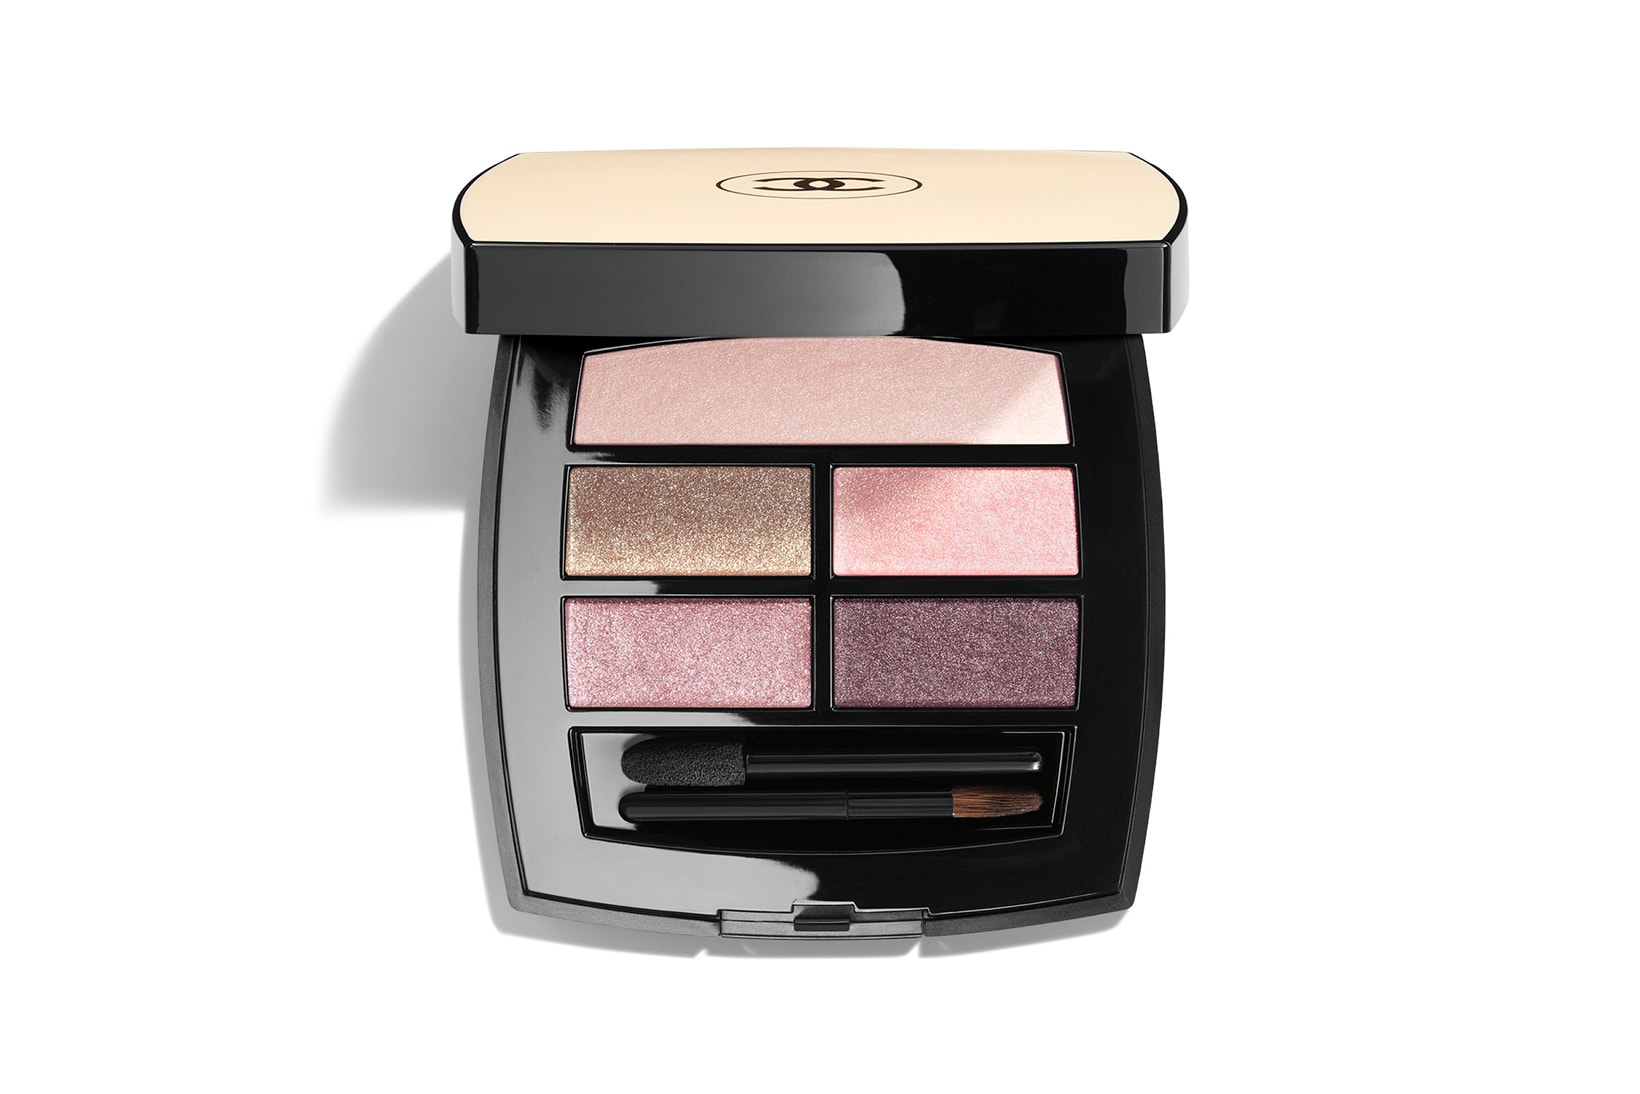 Chanel Beauty LES BEIGES Healthy Glow Natural Eyeshadow Palette Light